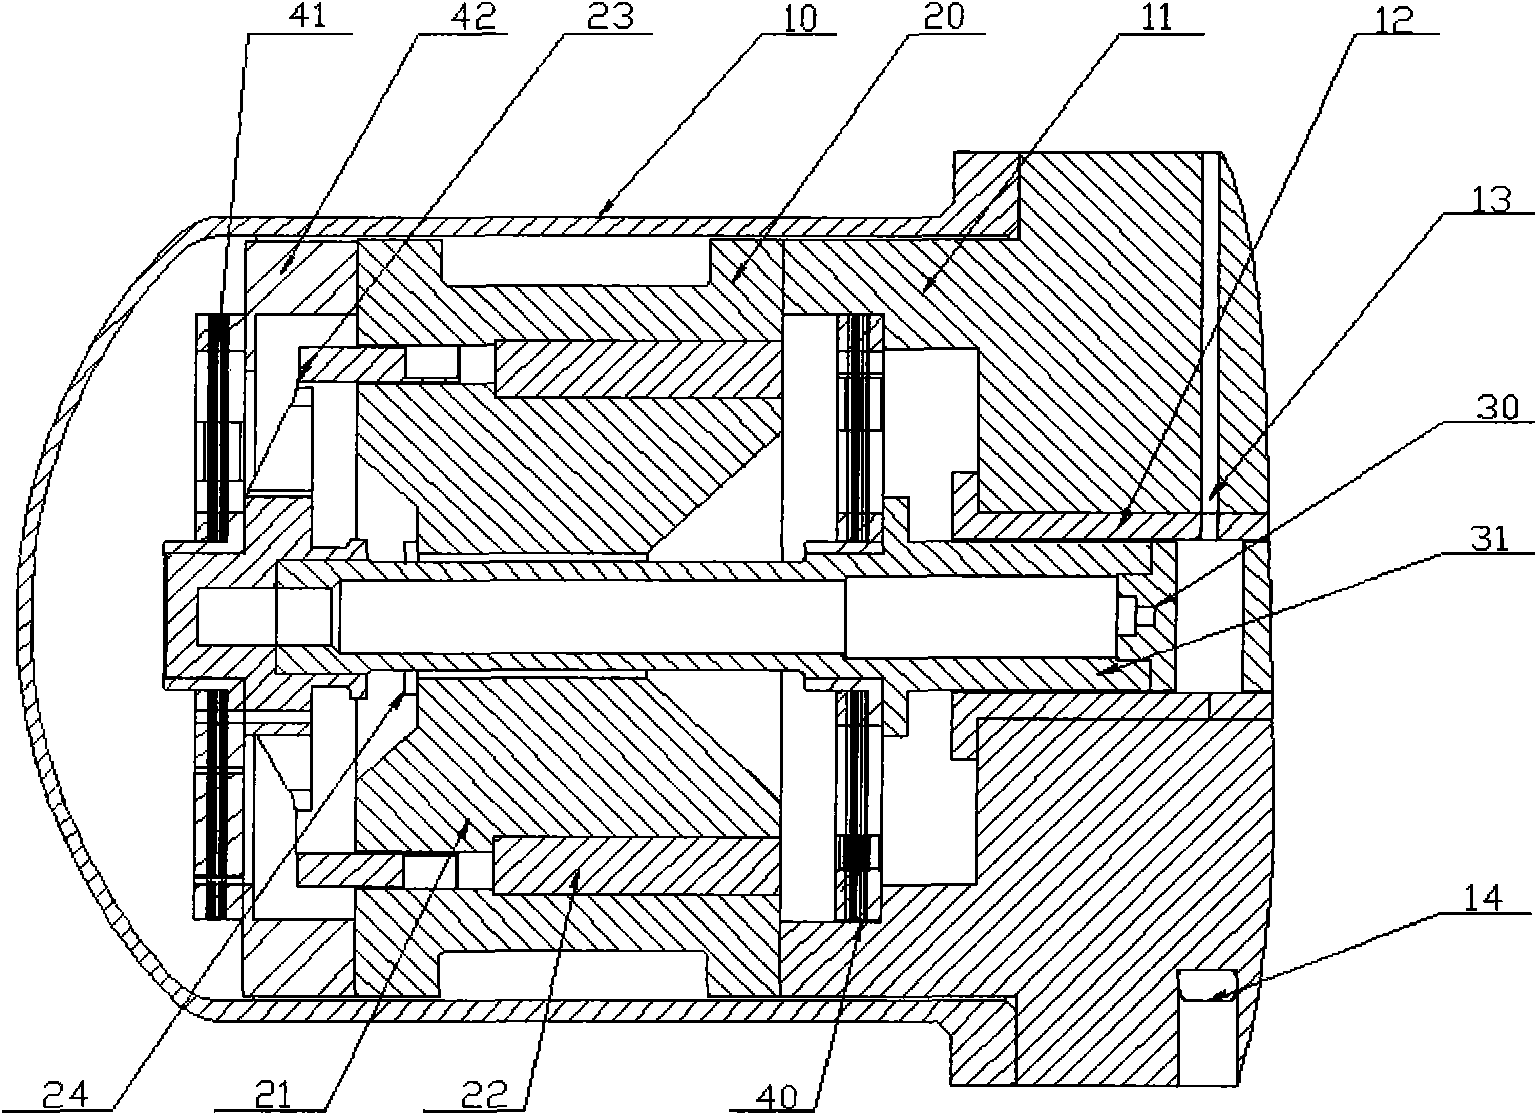 Linear compressor of plate spring supporting system adopting two different types of lines